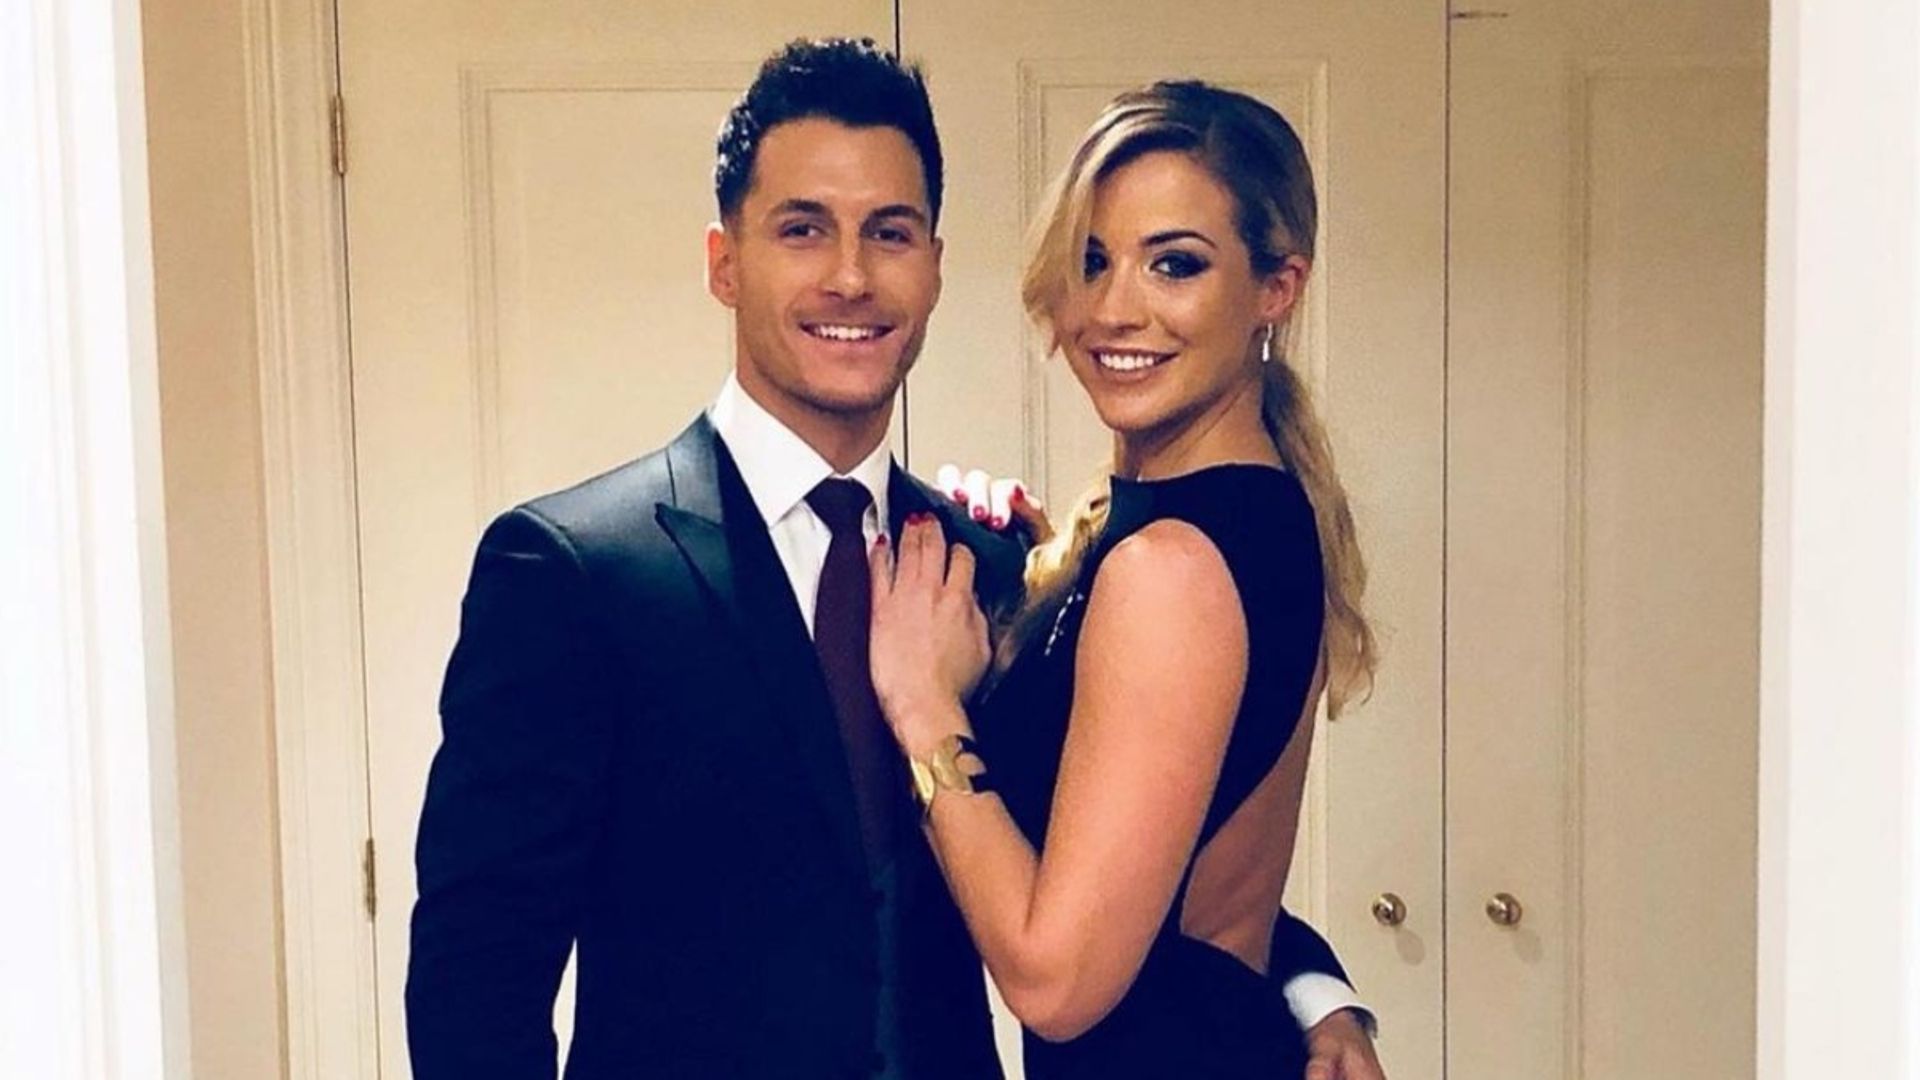 Gemma Atkinson shares video of Strictly star Gorka Marquez following hospital scare